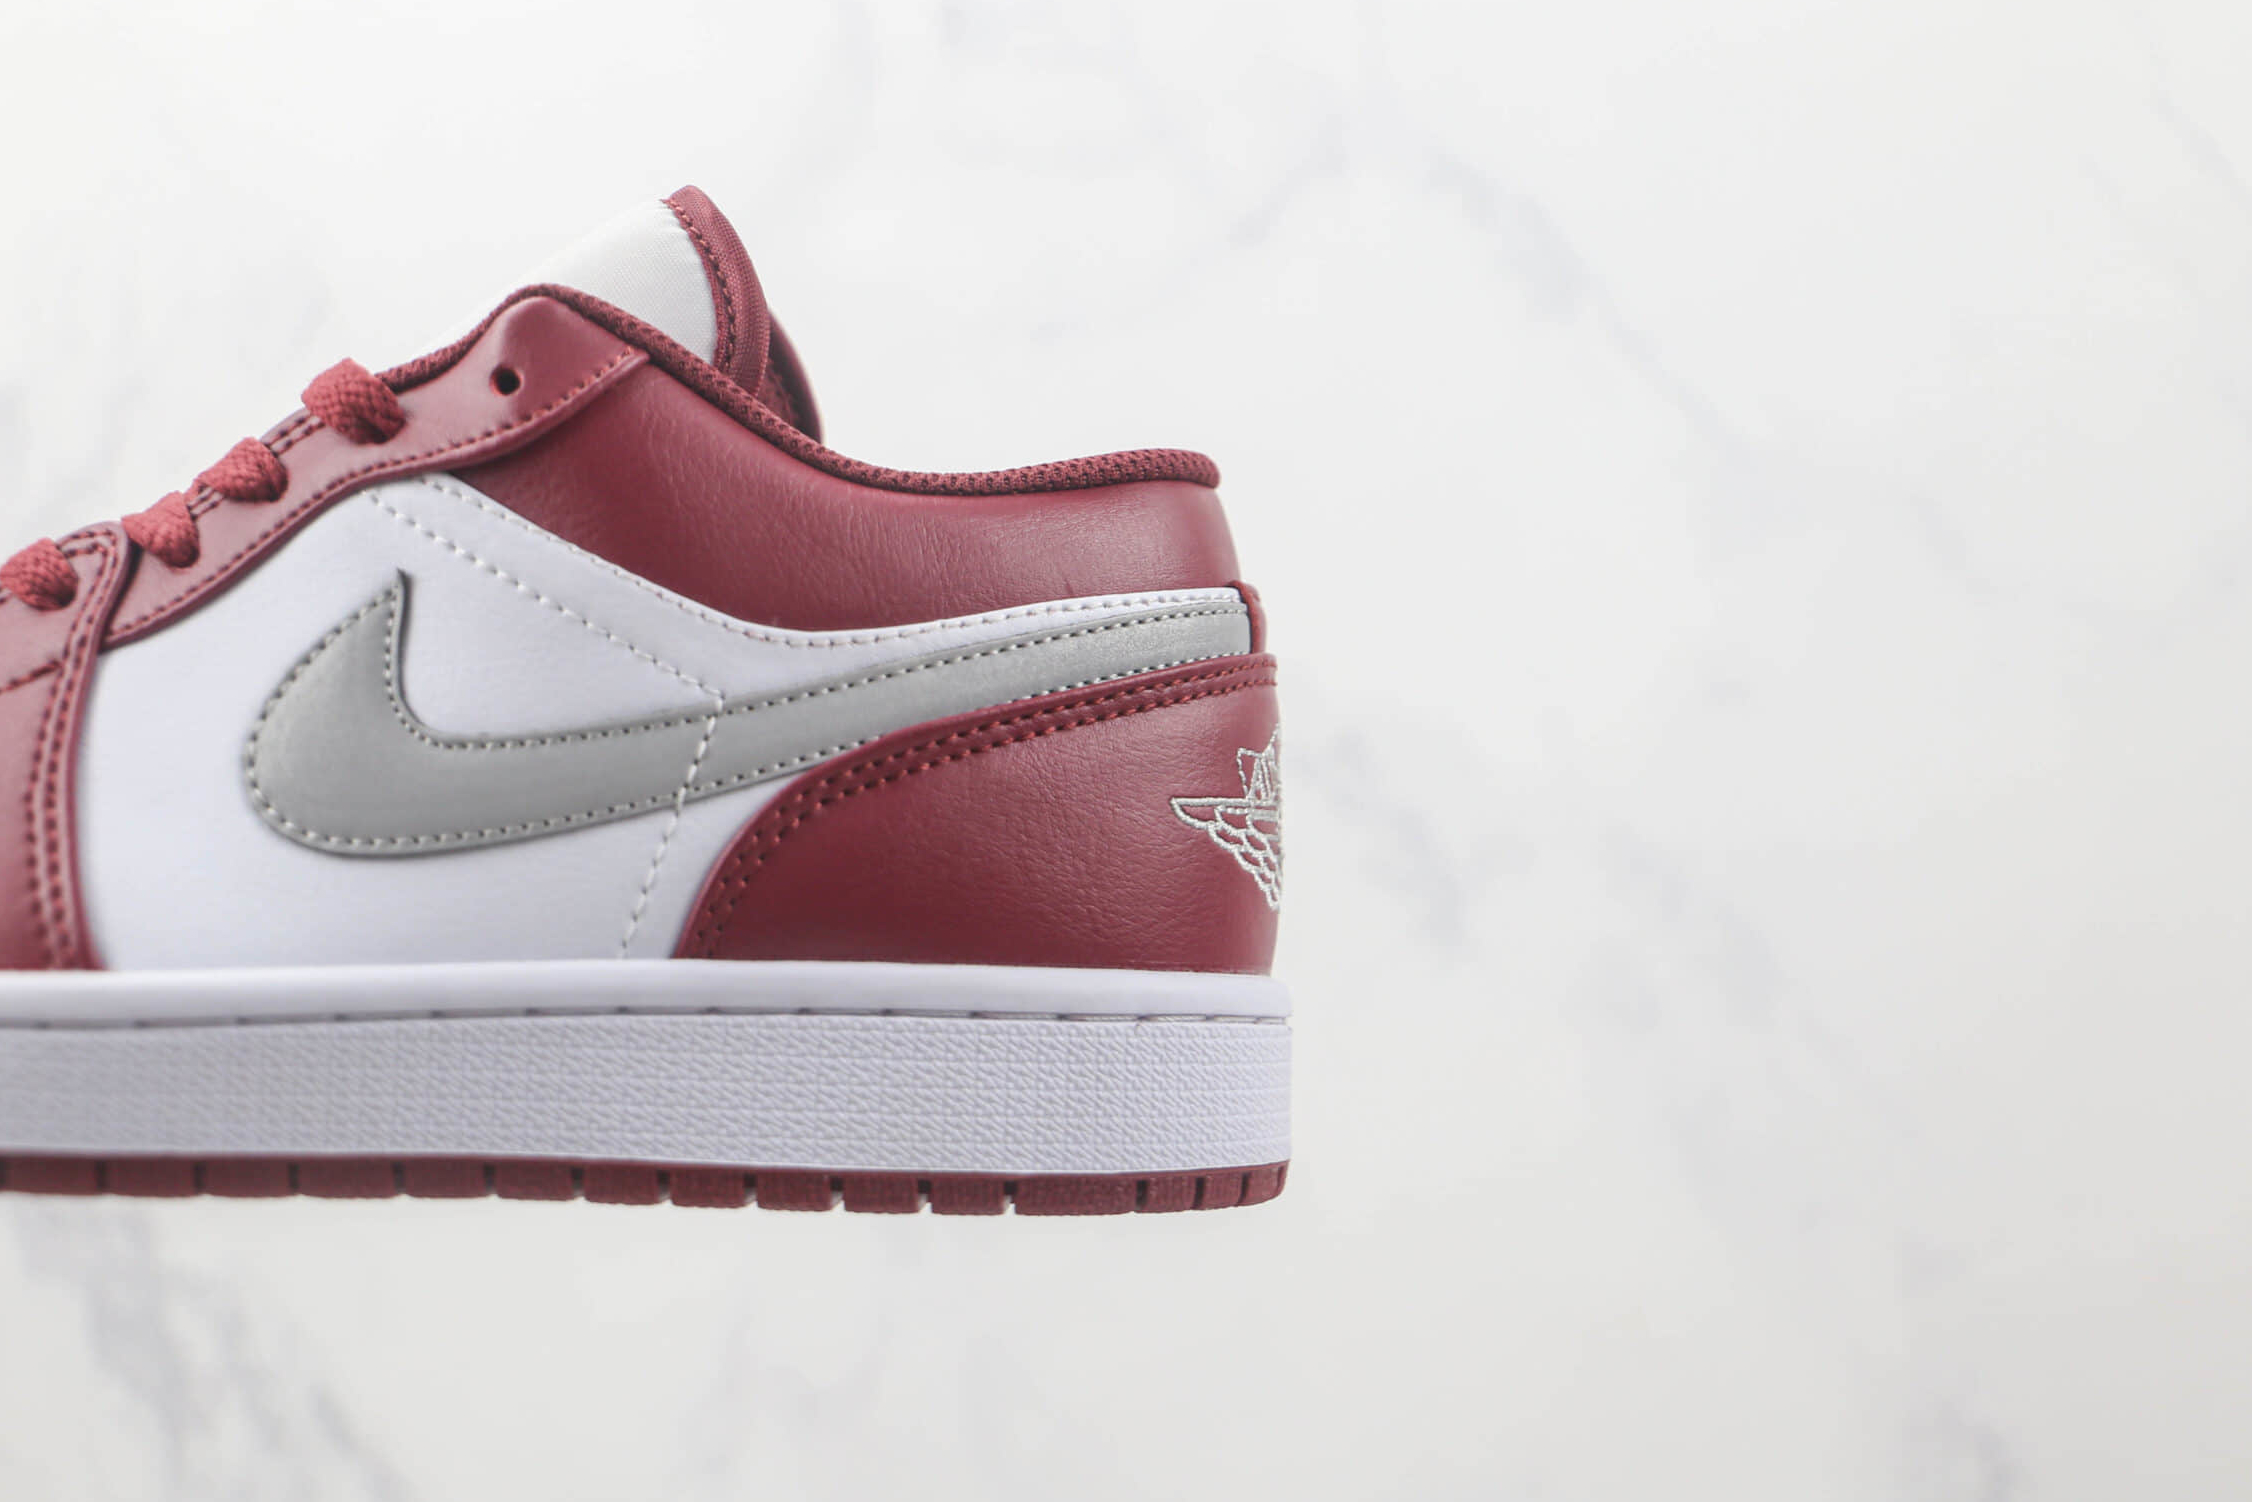 Air Jordan 1 Low 'Cherrywood Red' 553558-615 - Classic Style with Vibrant Red Accents